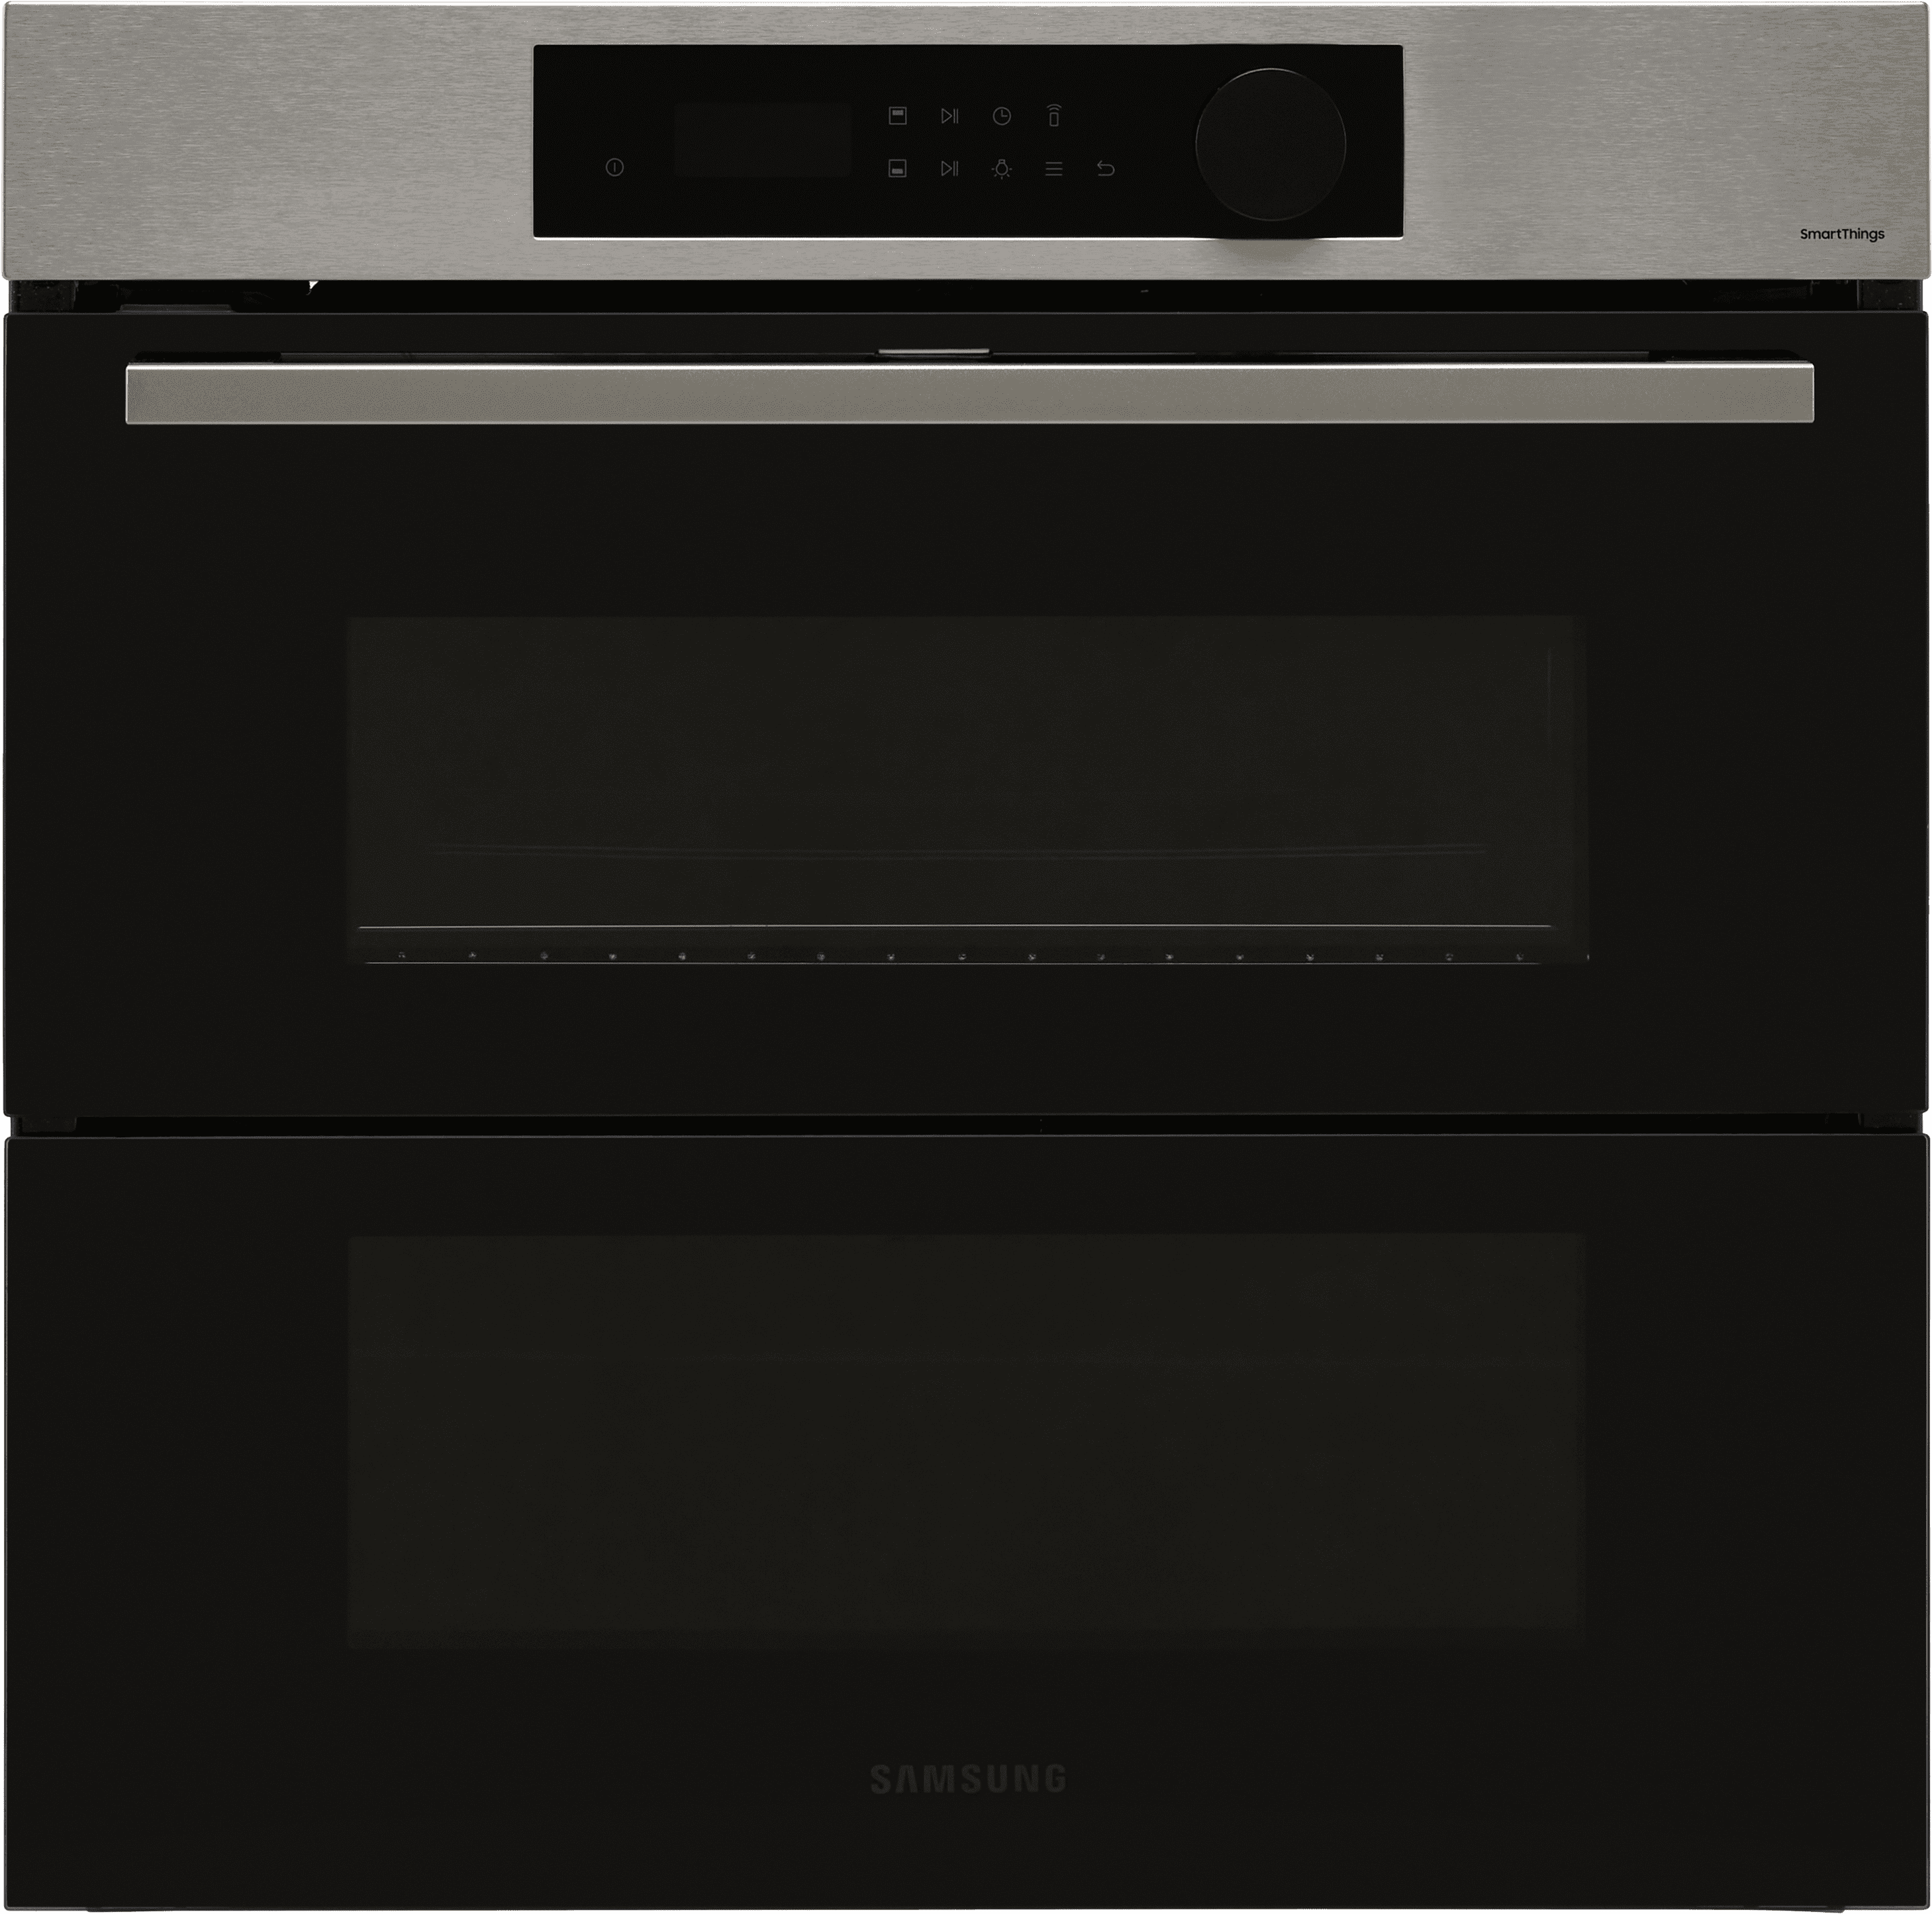 Samsung Series 5 Dual Cook Flex NV7B5740TAS Wifi Connected Built In Electric Single Oven - Stainless Steel - A+ Rated, Stainless Steel